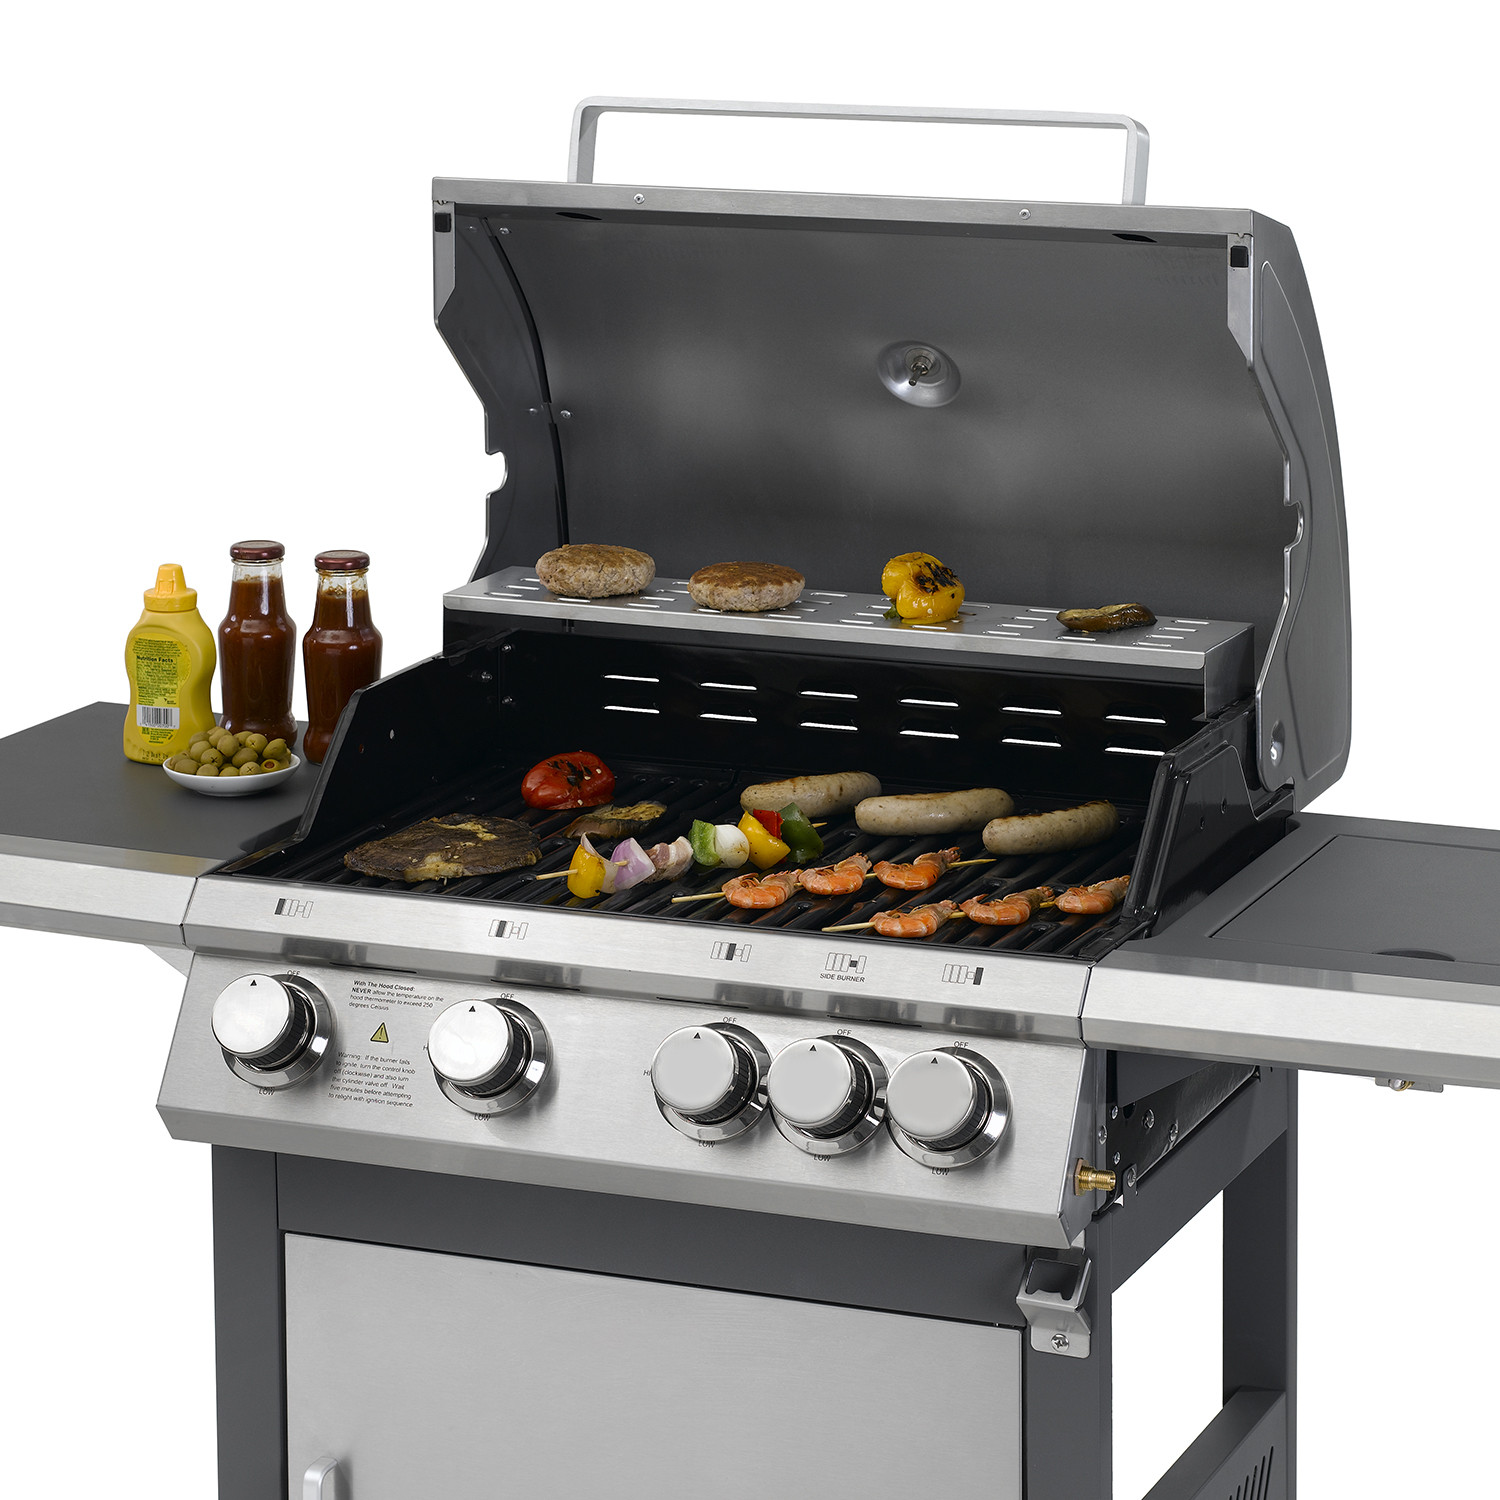 Rockland Gas Grill BBQ Image 5